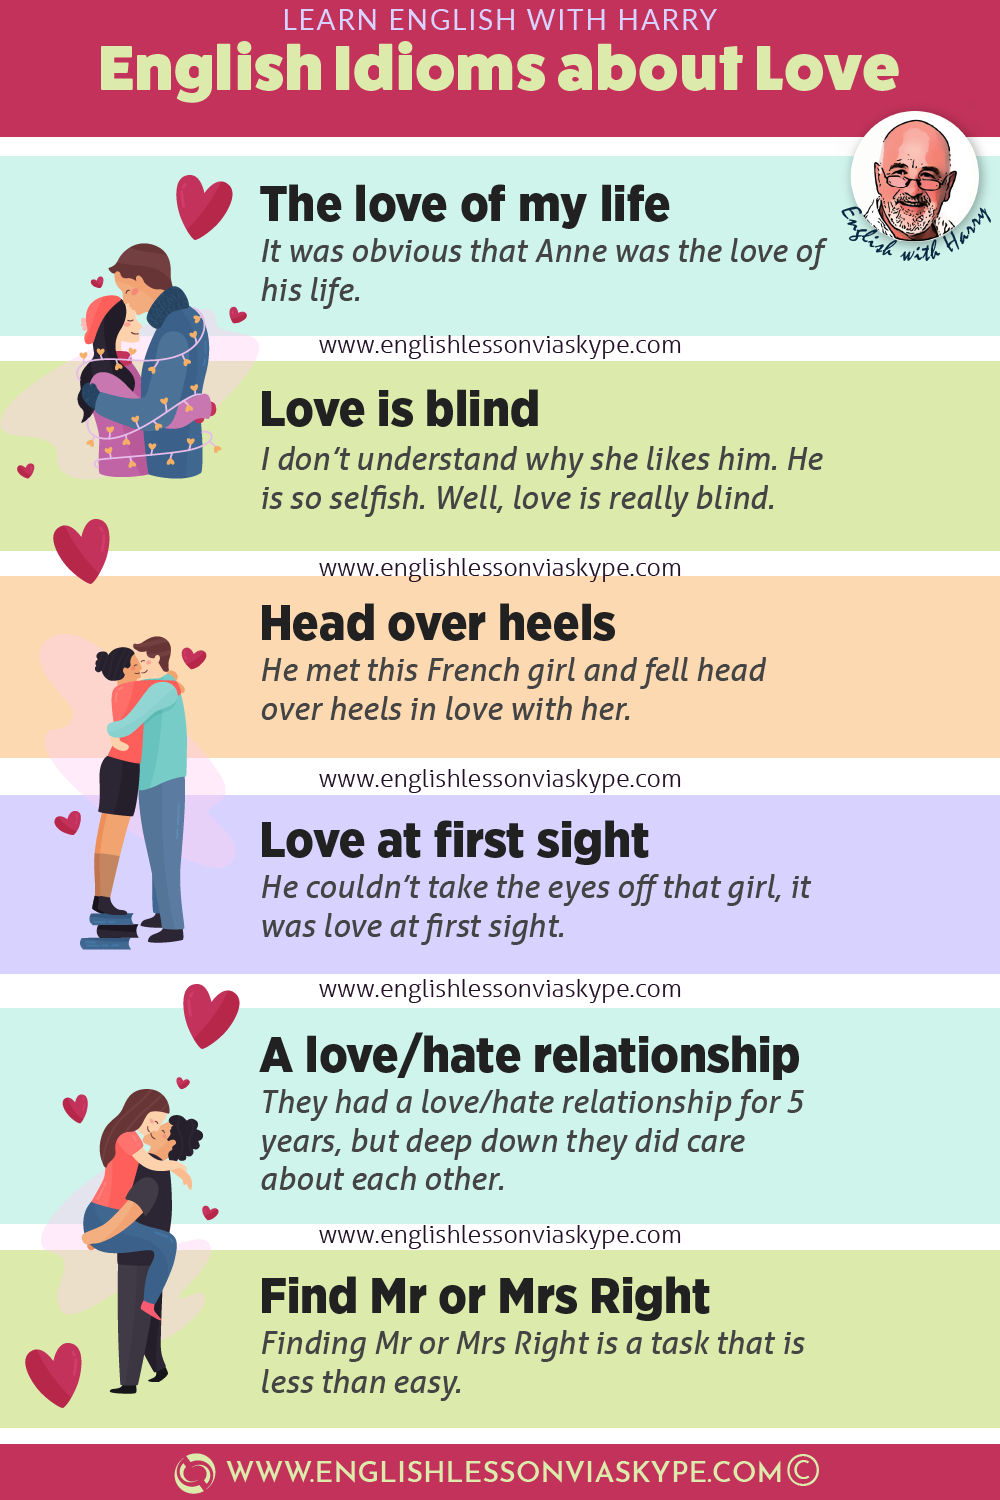 12 English Love Idioms and Phrases. Advanced English learning. How to talk about love in English. #learnenglish #ingles #idioms #vocabulary #love #valentinesday